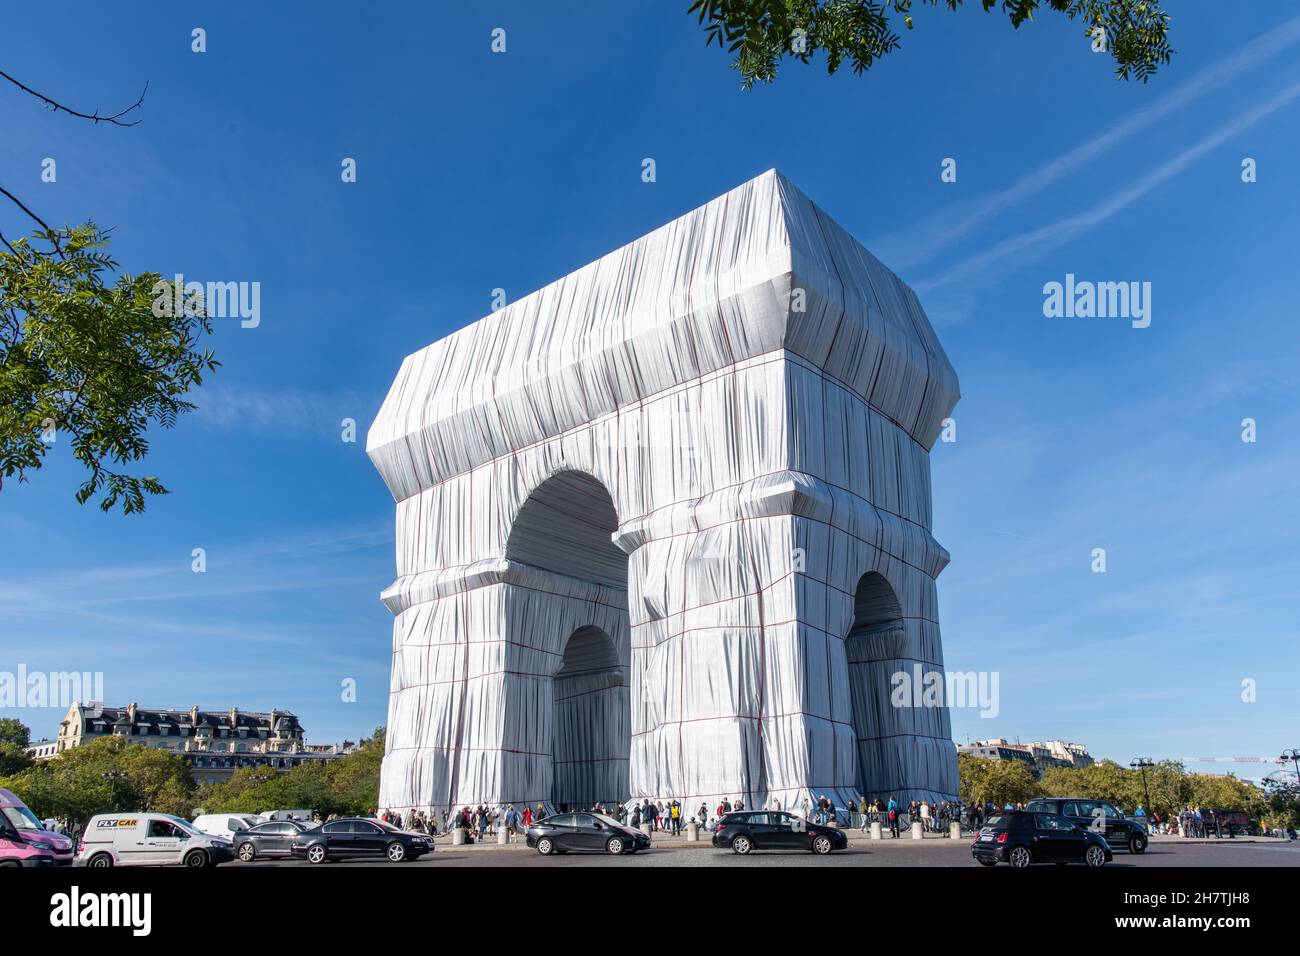 Paris, France-September 2021; Low angle view of wrapped Arc de Triomphe art installation by Christo with Place Charles de Gaulle filled with tourists Stock Photo